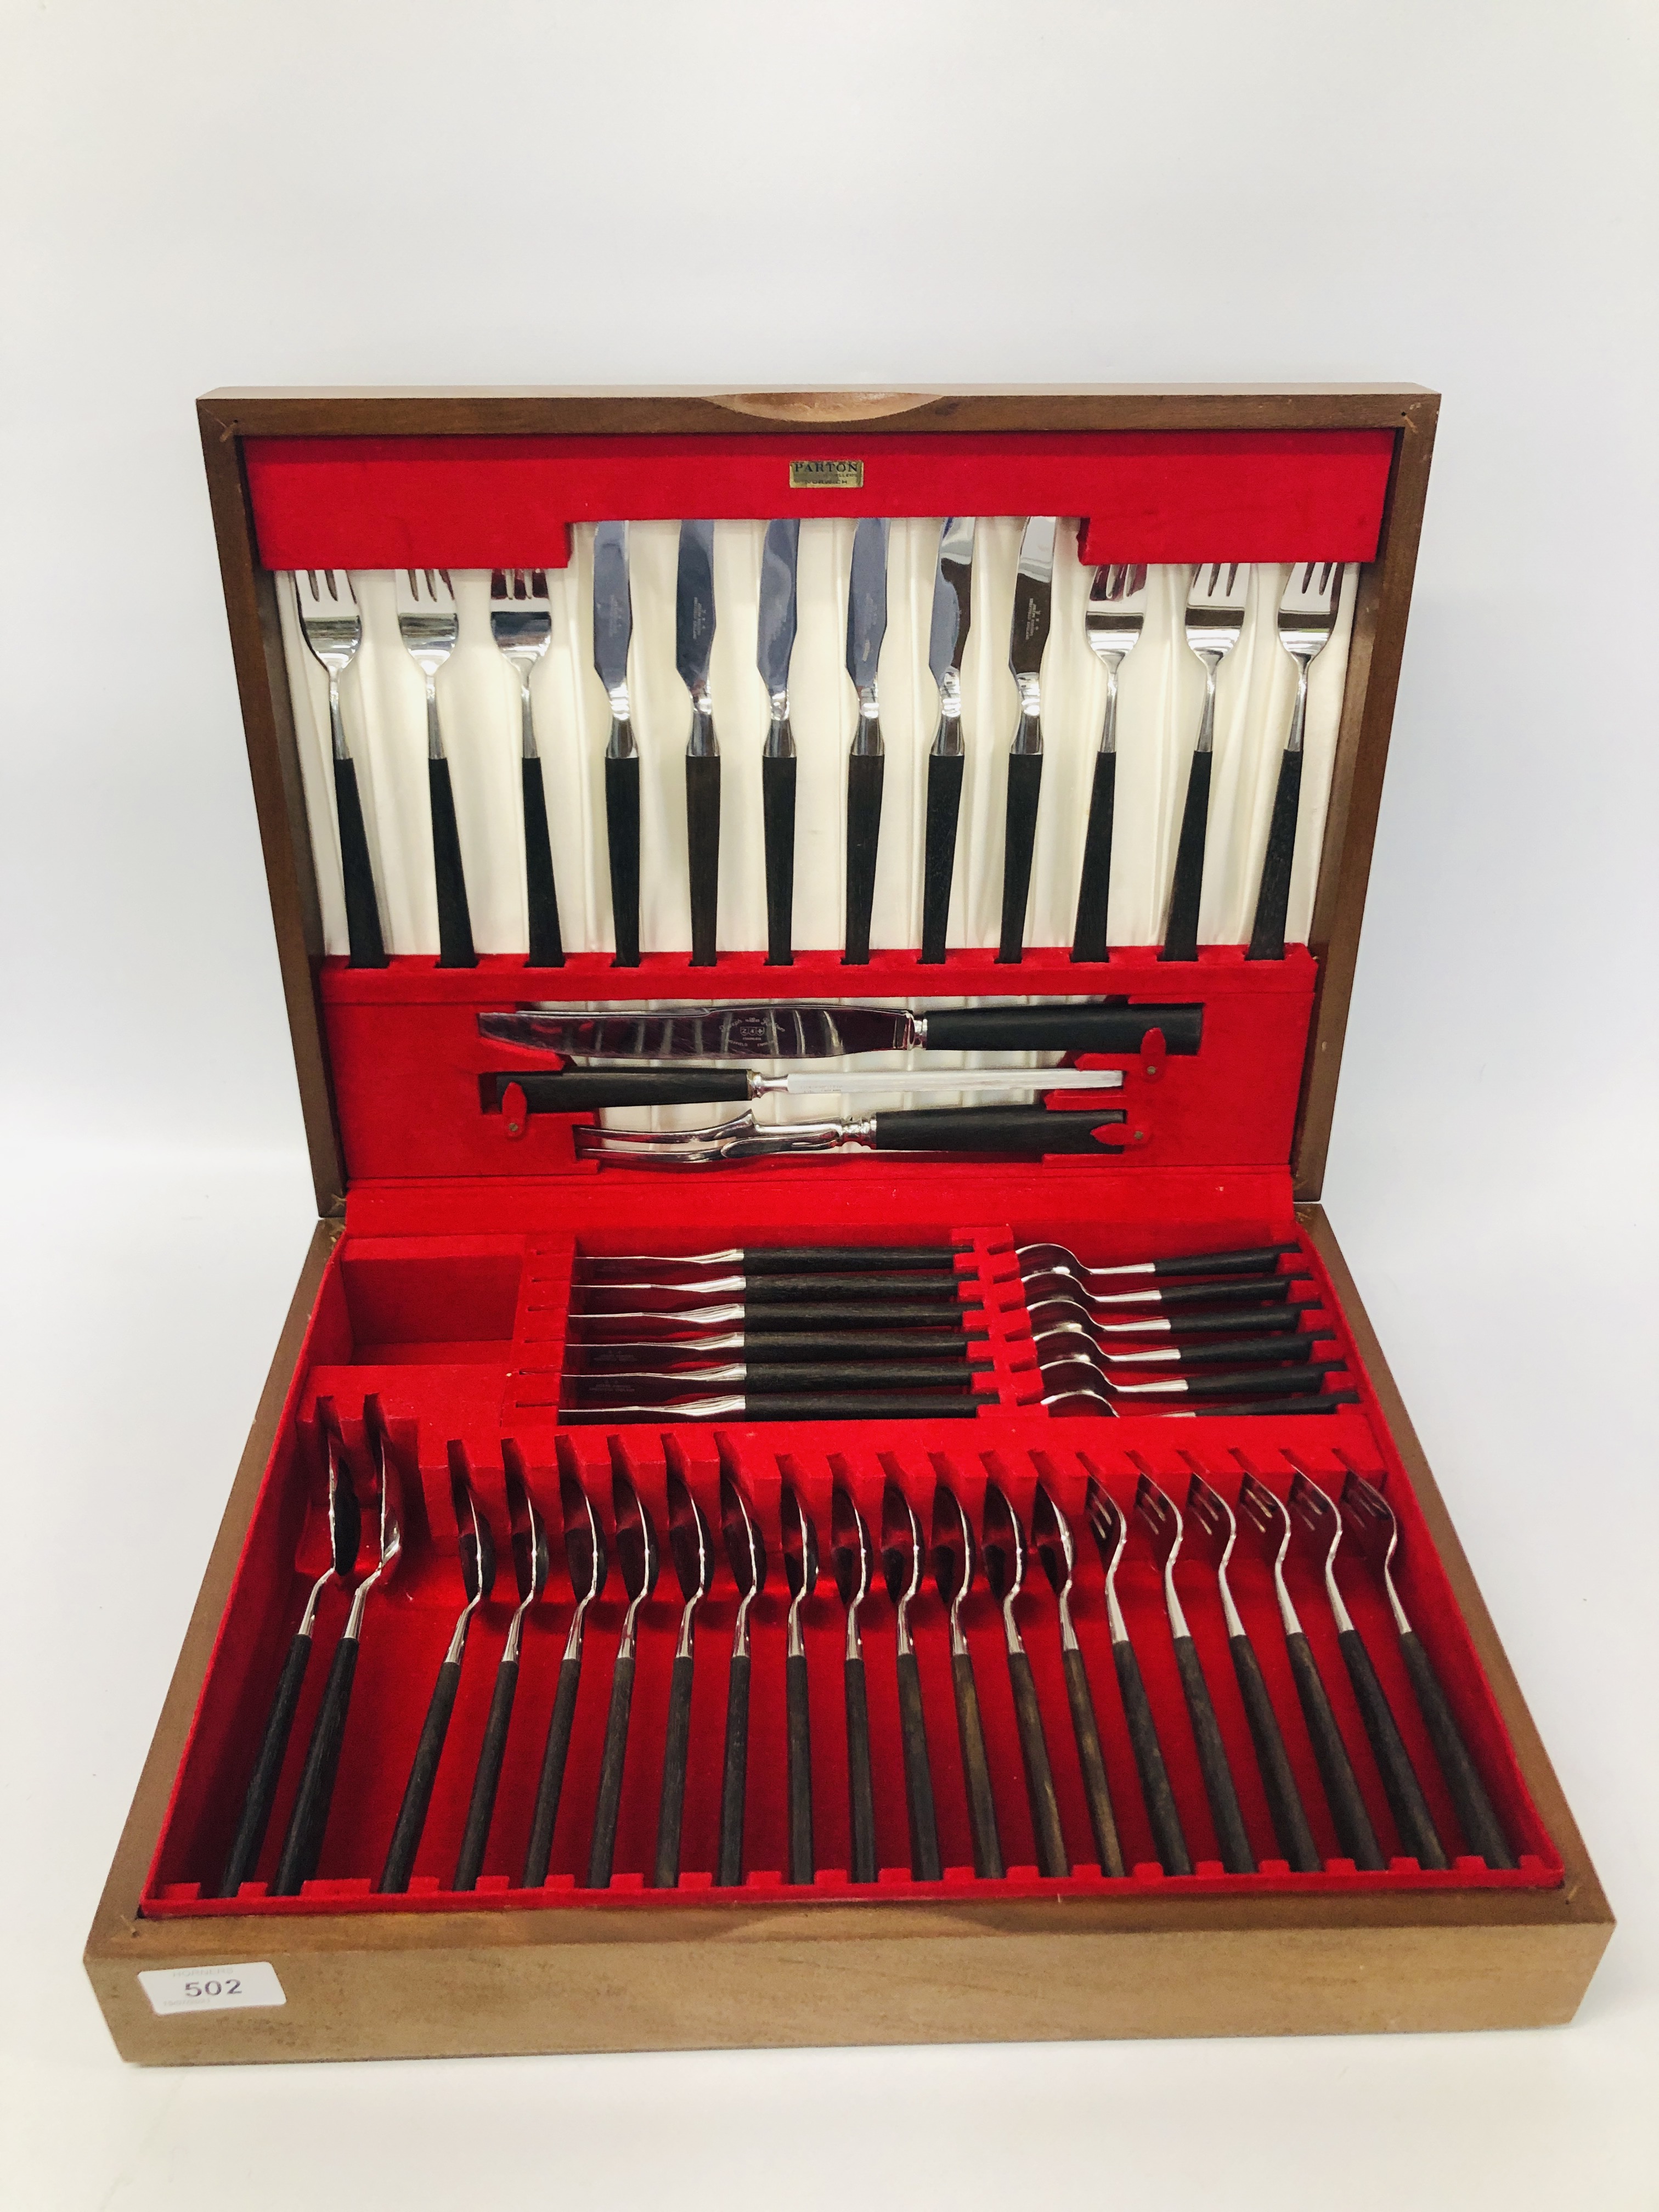 A JOSEPH ROGERS CANTEEN OF CUTLERY BOXED